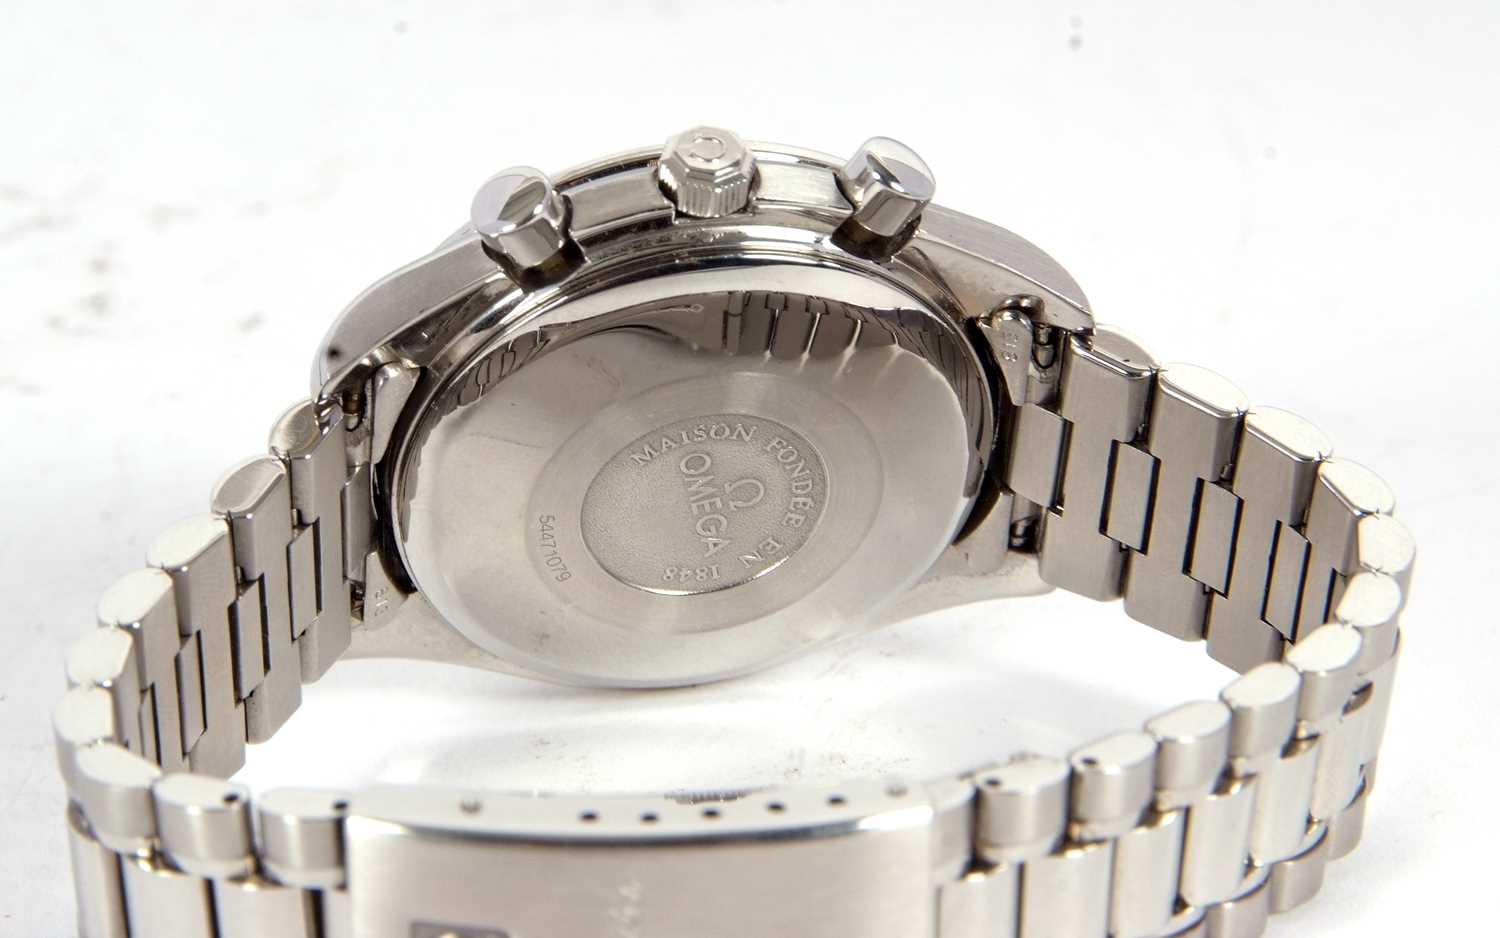 An Omega Seamaster Triple Date automatic gents wristwatch, the watch has a stainless steel case - Image 4 of 7